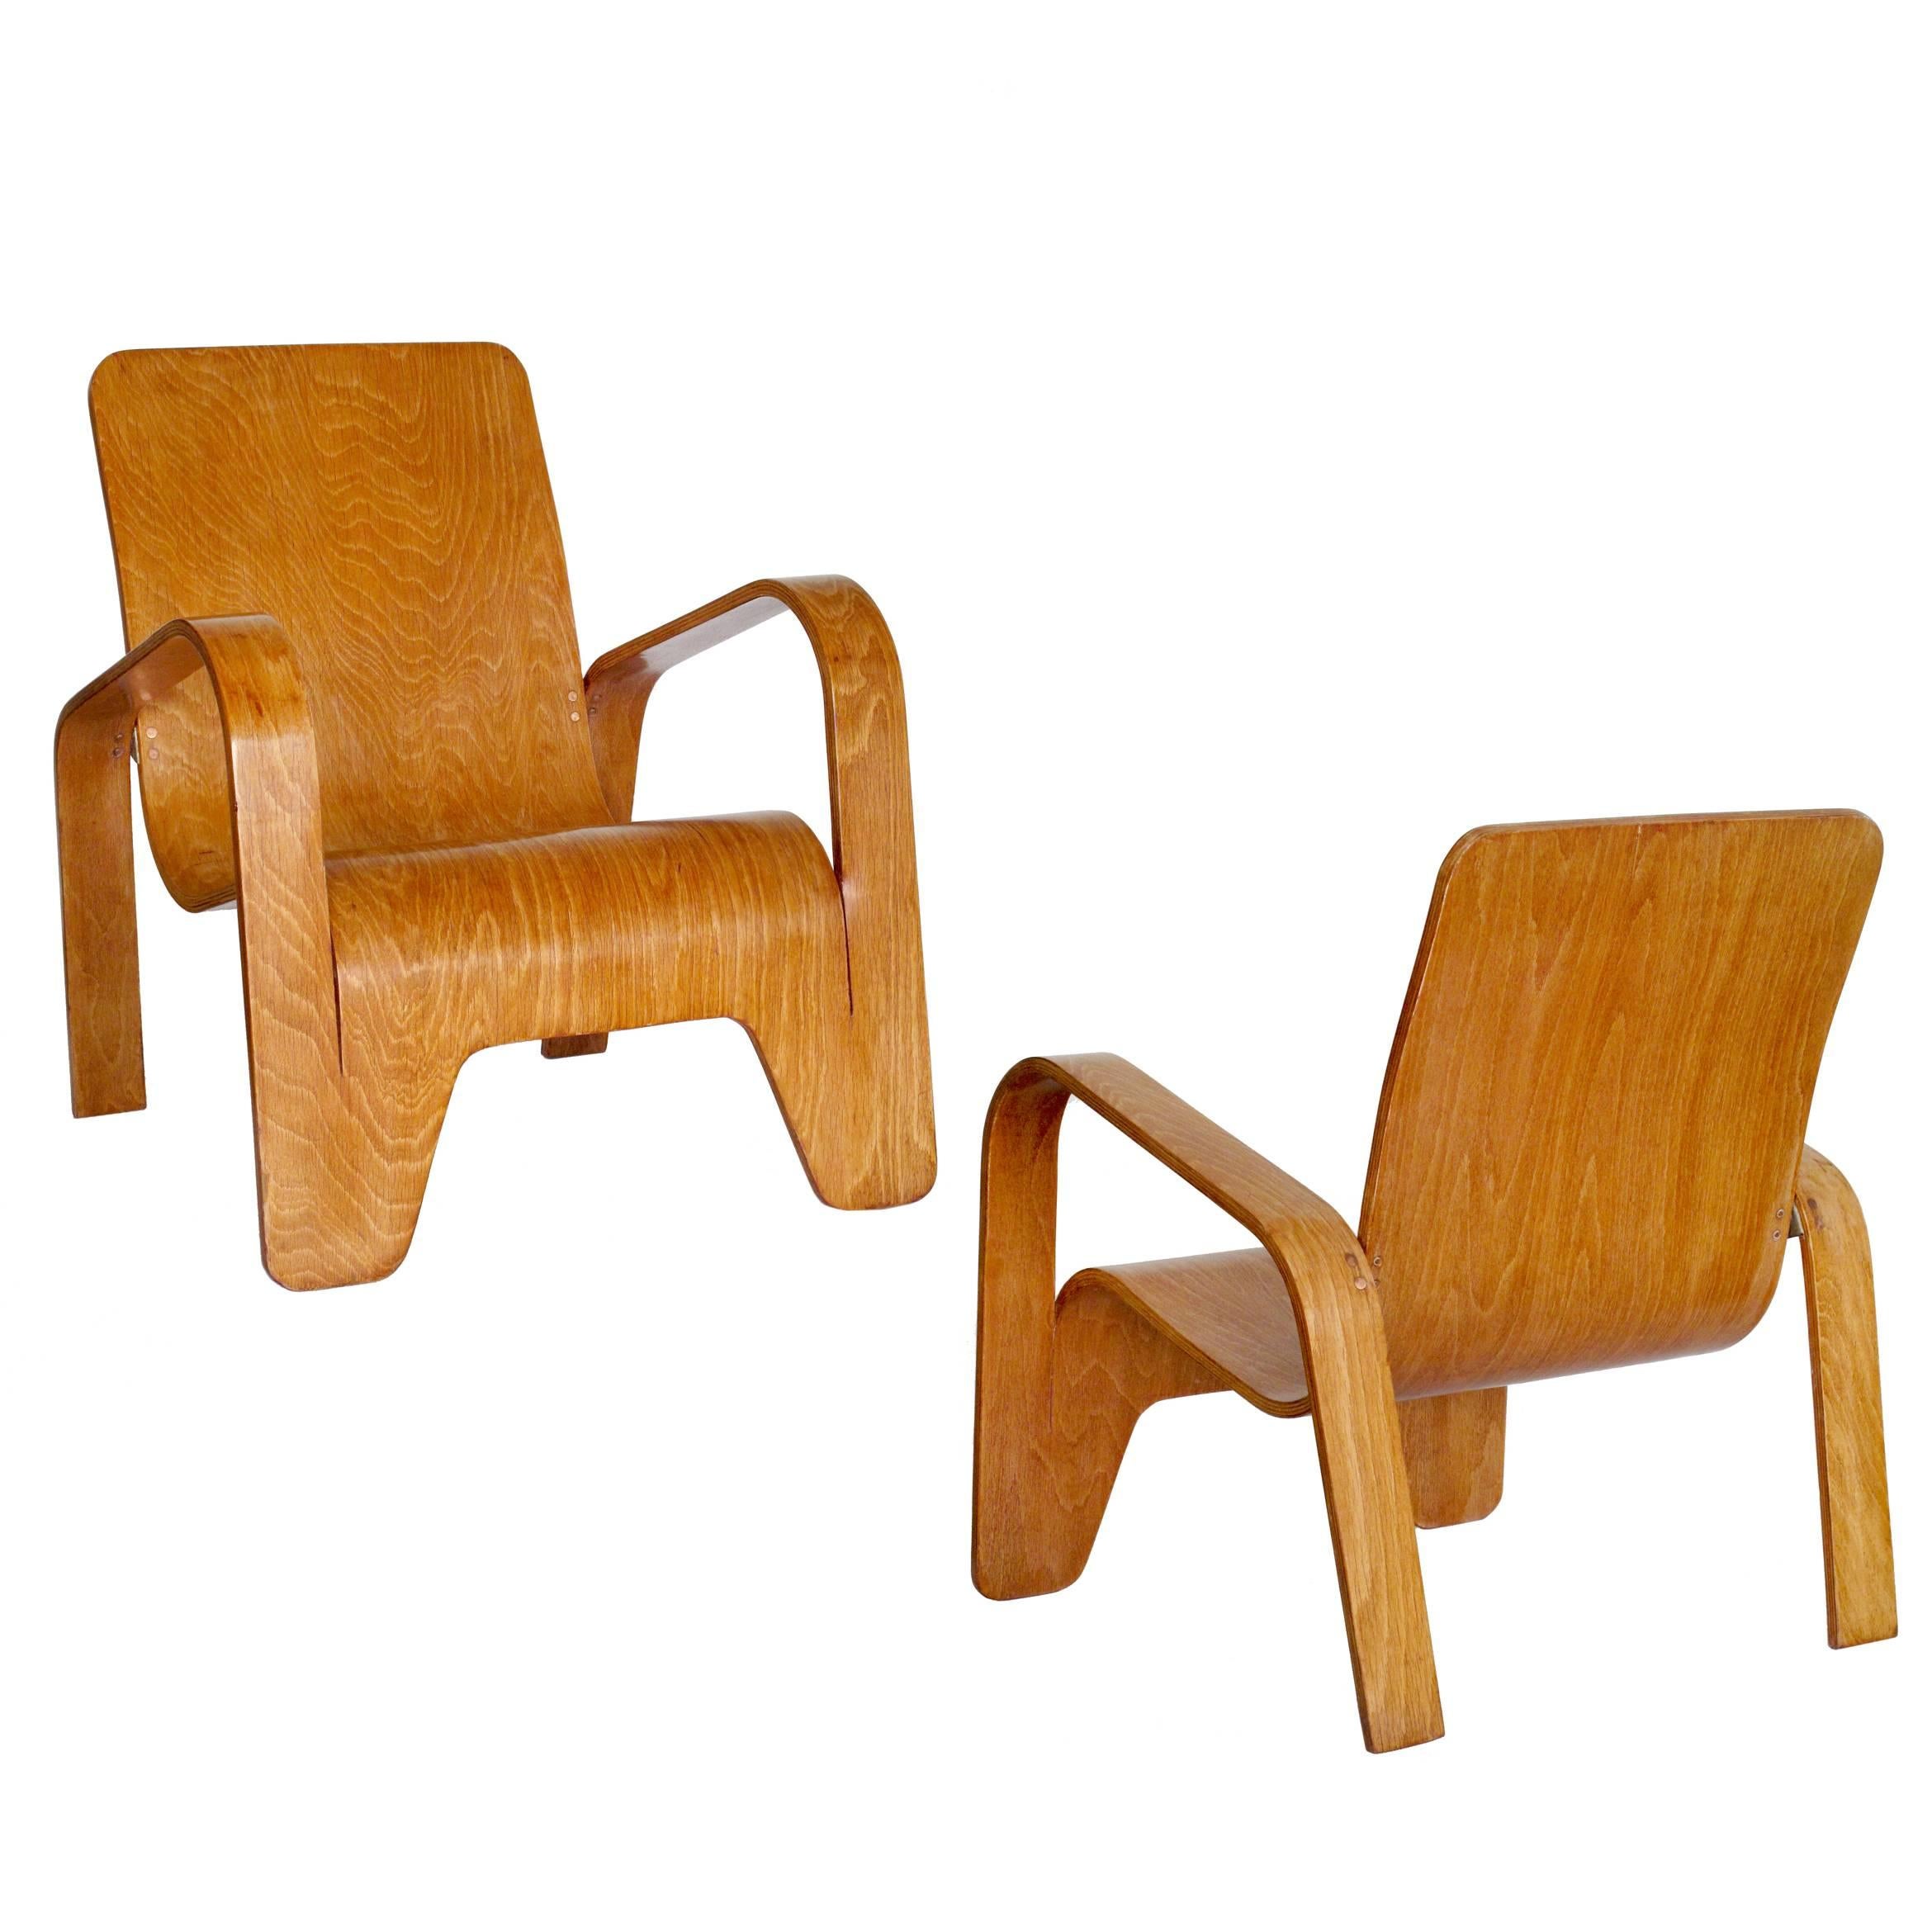 Pair of plywood Lounge Armchairs by Han Pieck Made by Lawo, Netherlands, 1940s For Sale